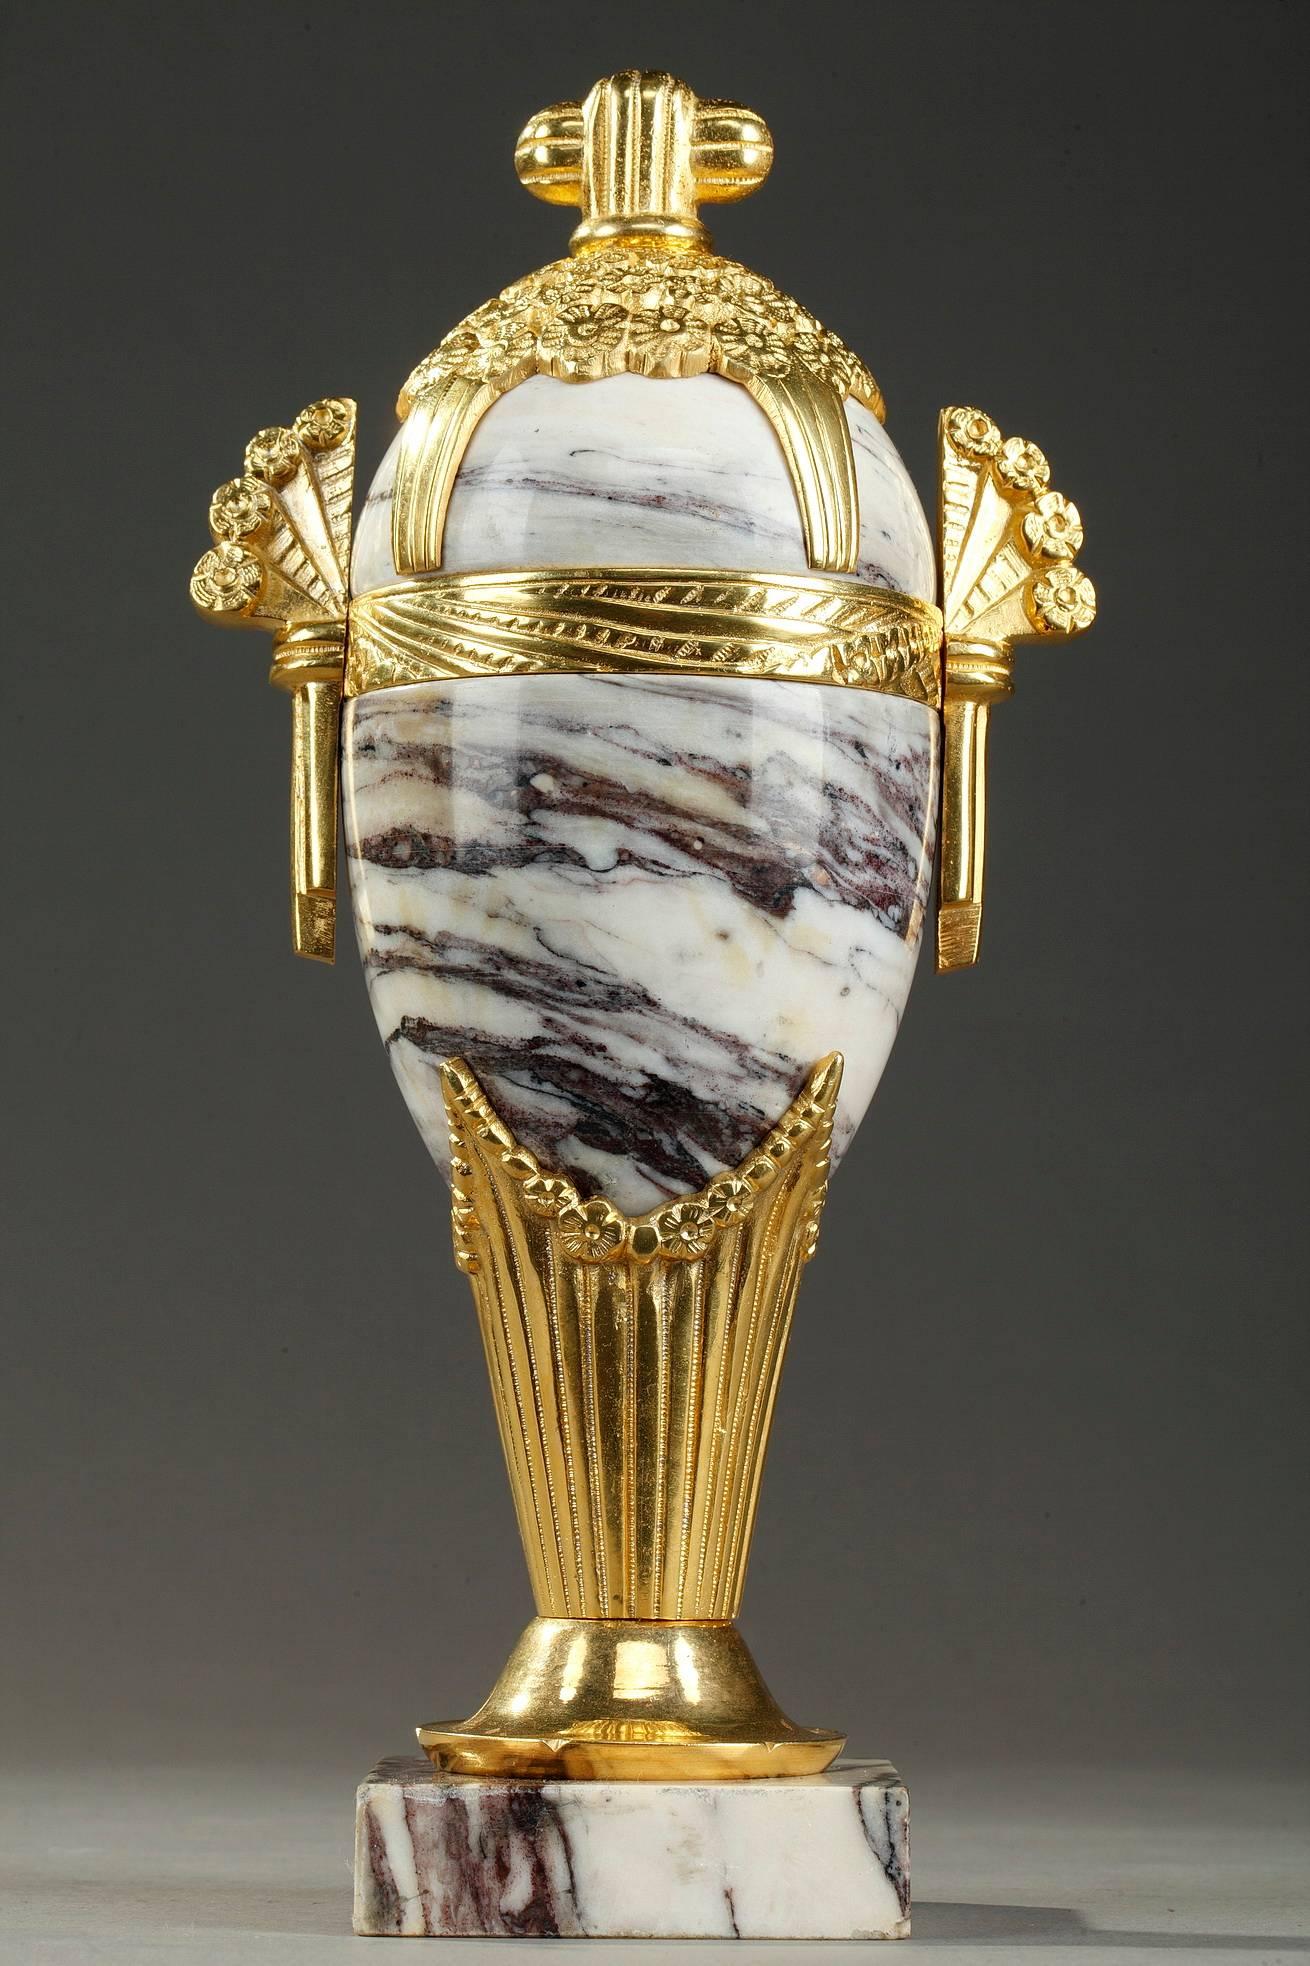 Pair of Art Deco vases crafted of white marble and gilt bronze, finely chiseled with stylized draperies and garlands of flowers. Two bunches of flowers form the handles, and four others adorn the lid.


circa 1930
Dimensions: W 4.9 in - D 3.1in